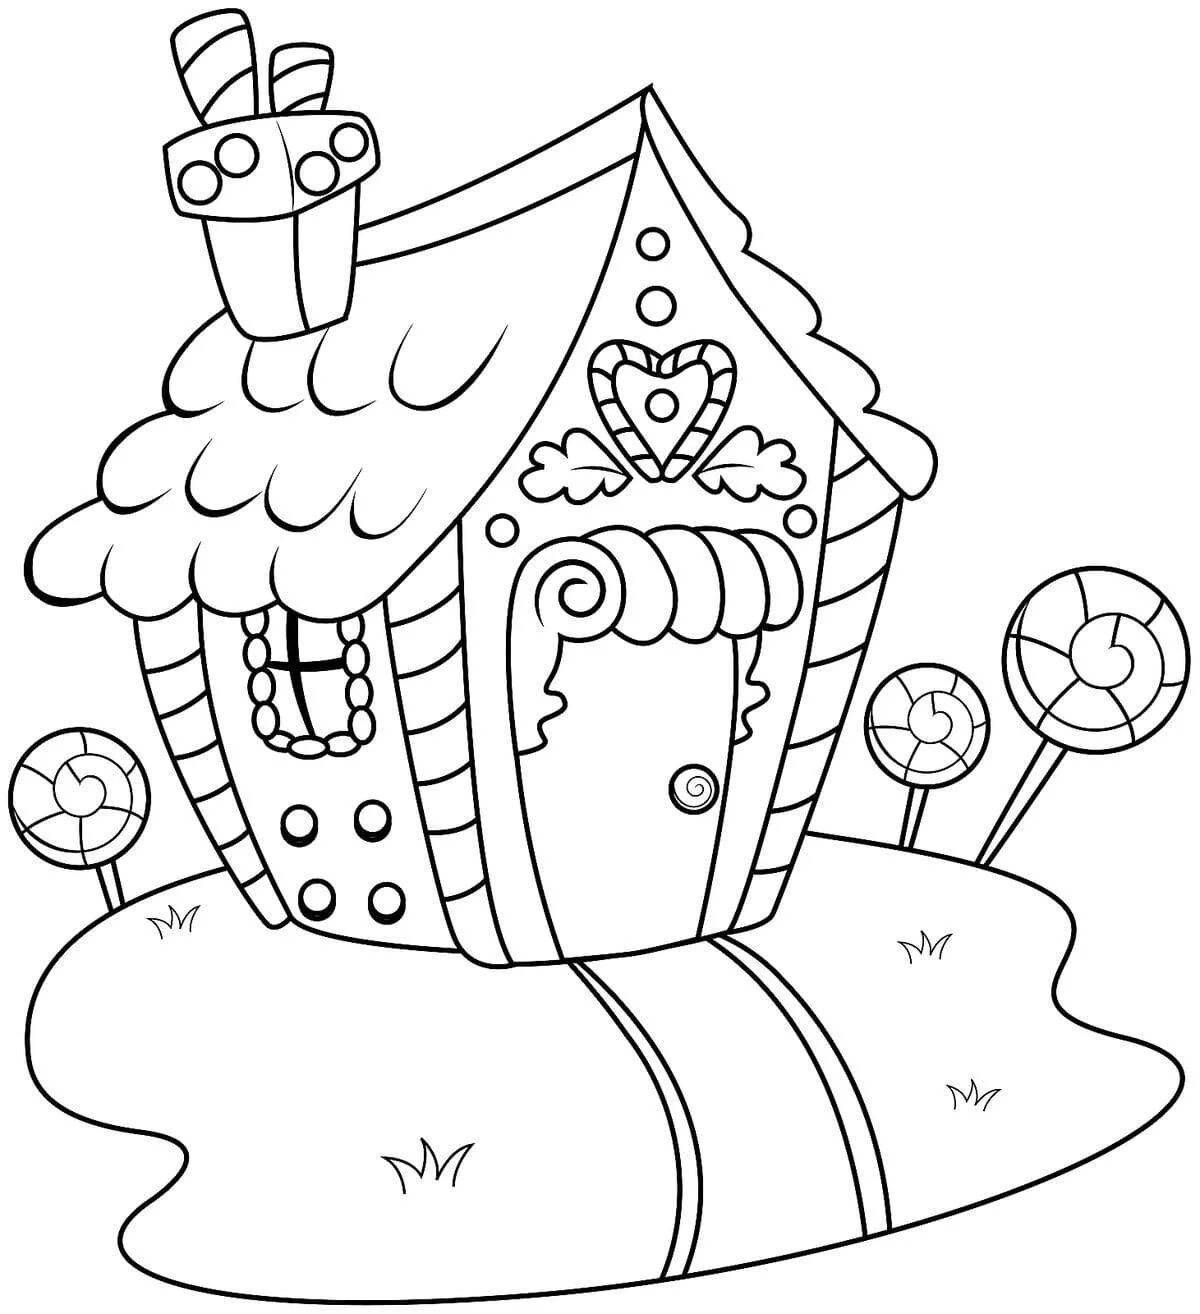 Innovative gingerbread house coloring book